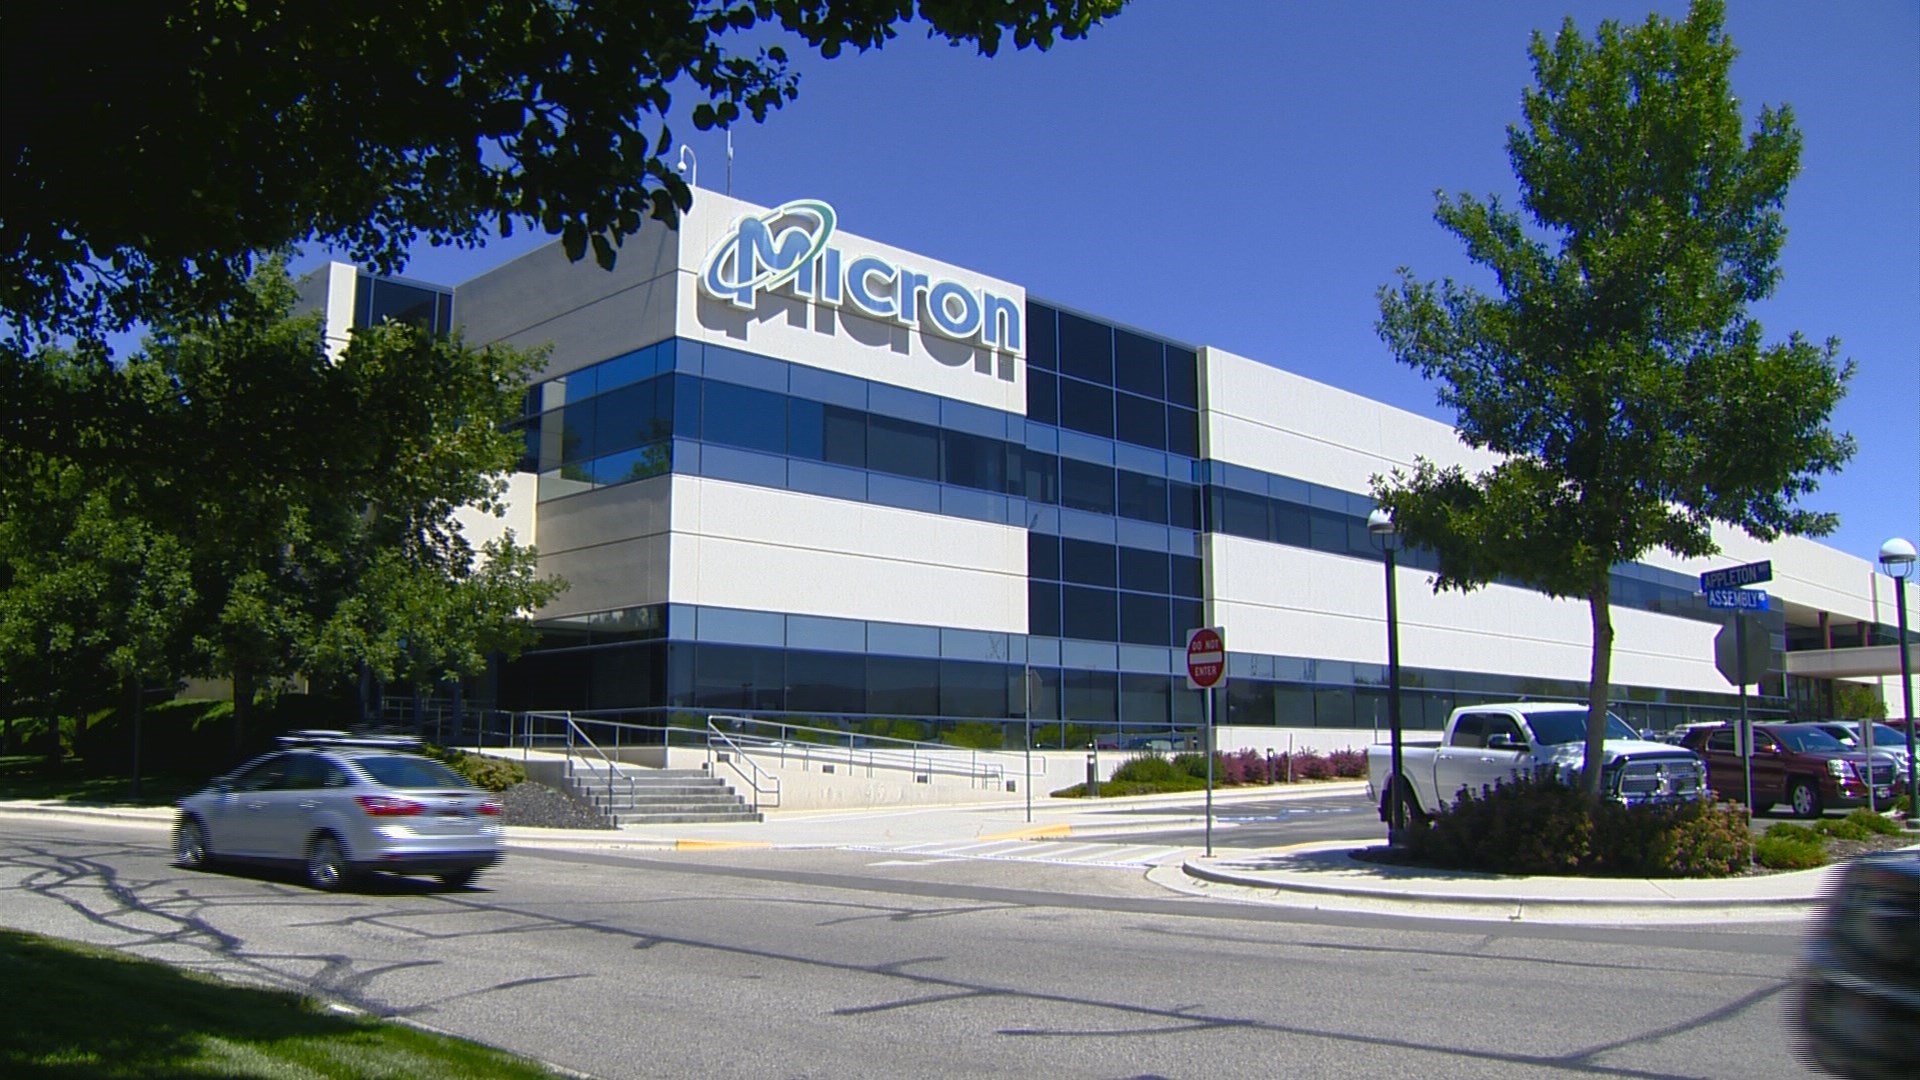 According to documents filed with the state comptroller's office, Micron's investment would total at least $20 billion through 2030.